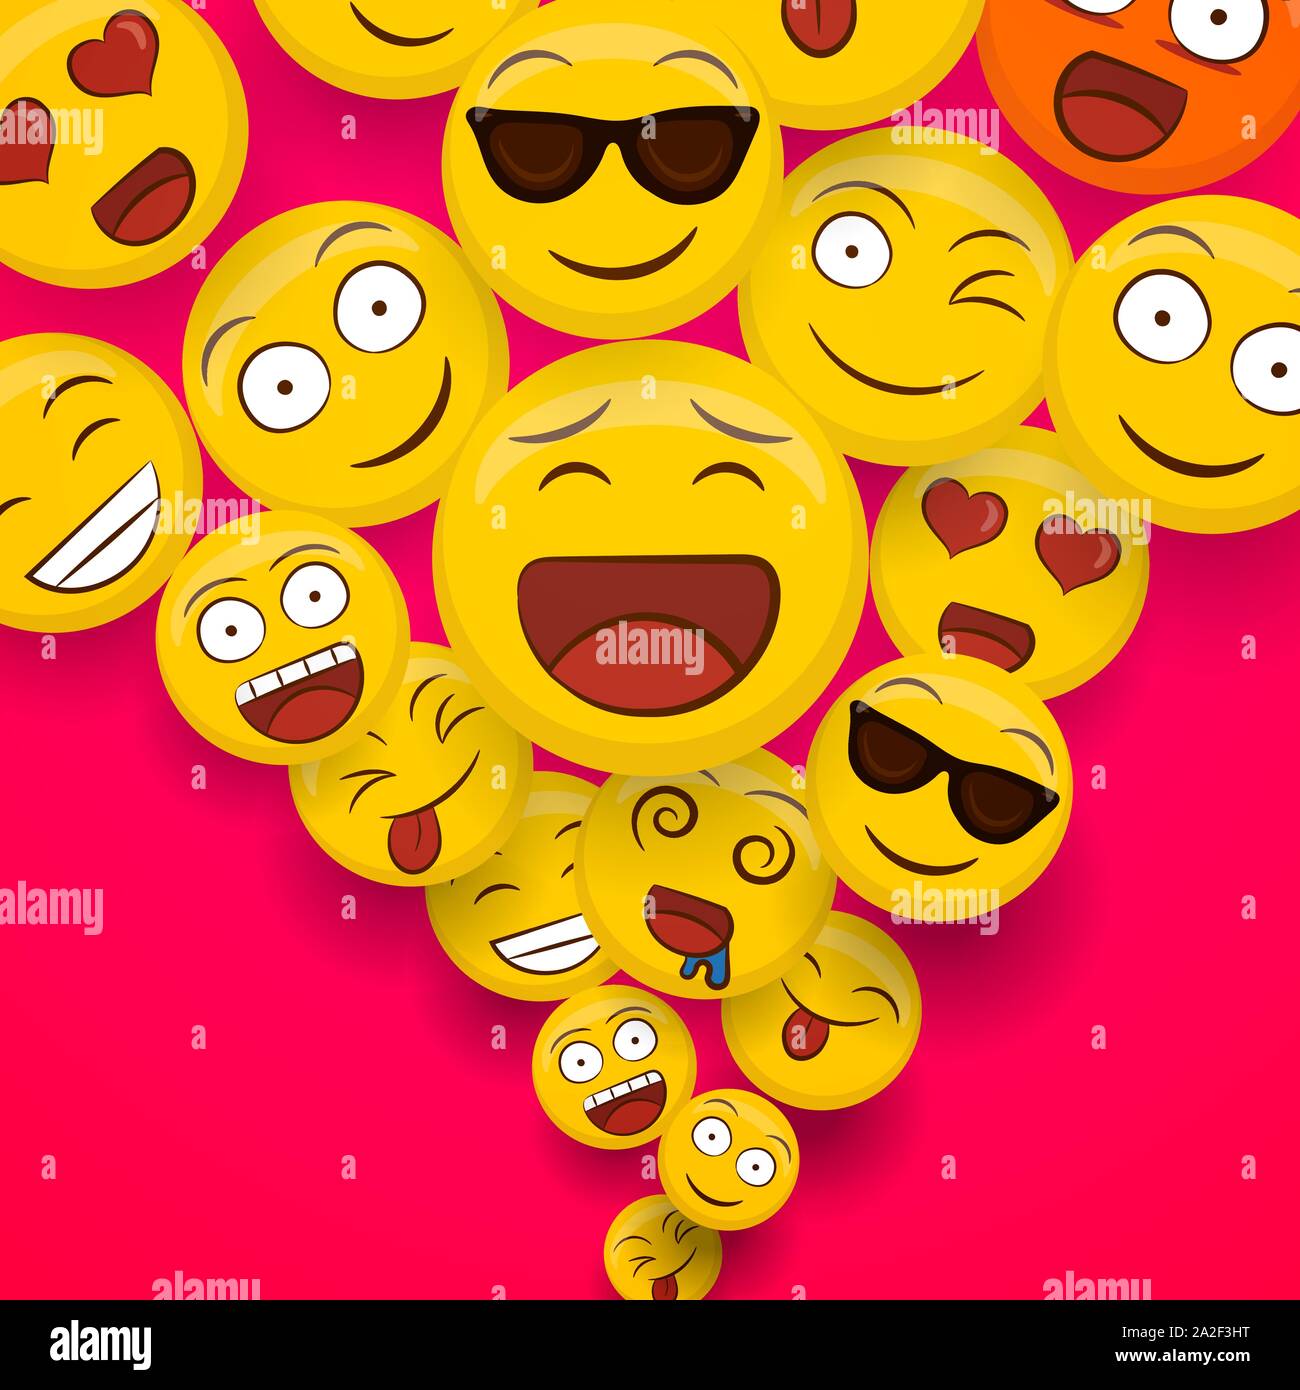 Social yellow emoticon icons on isolated background. Fun smiley face cartoons includes happy, cute and funny emotions. Stock Vector